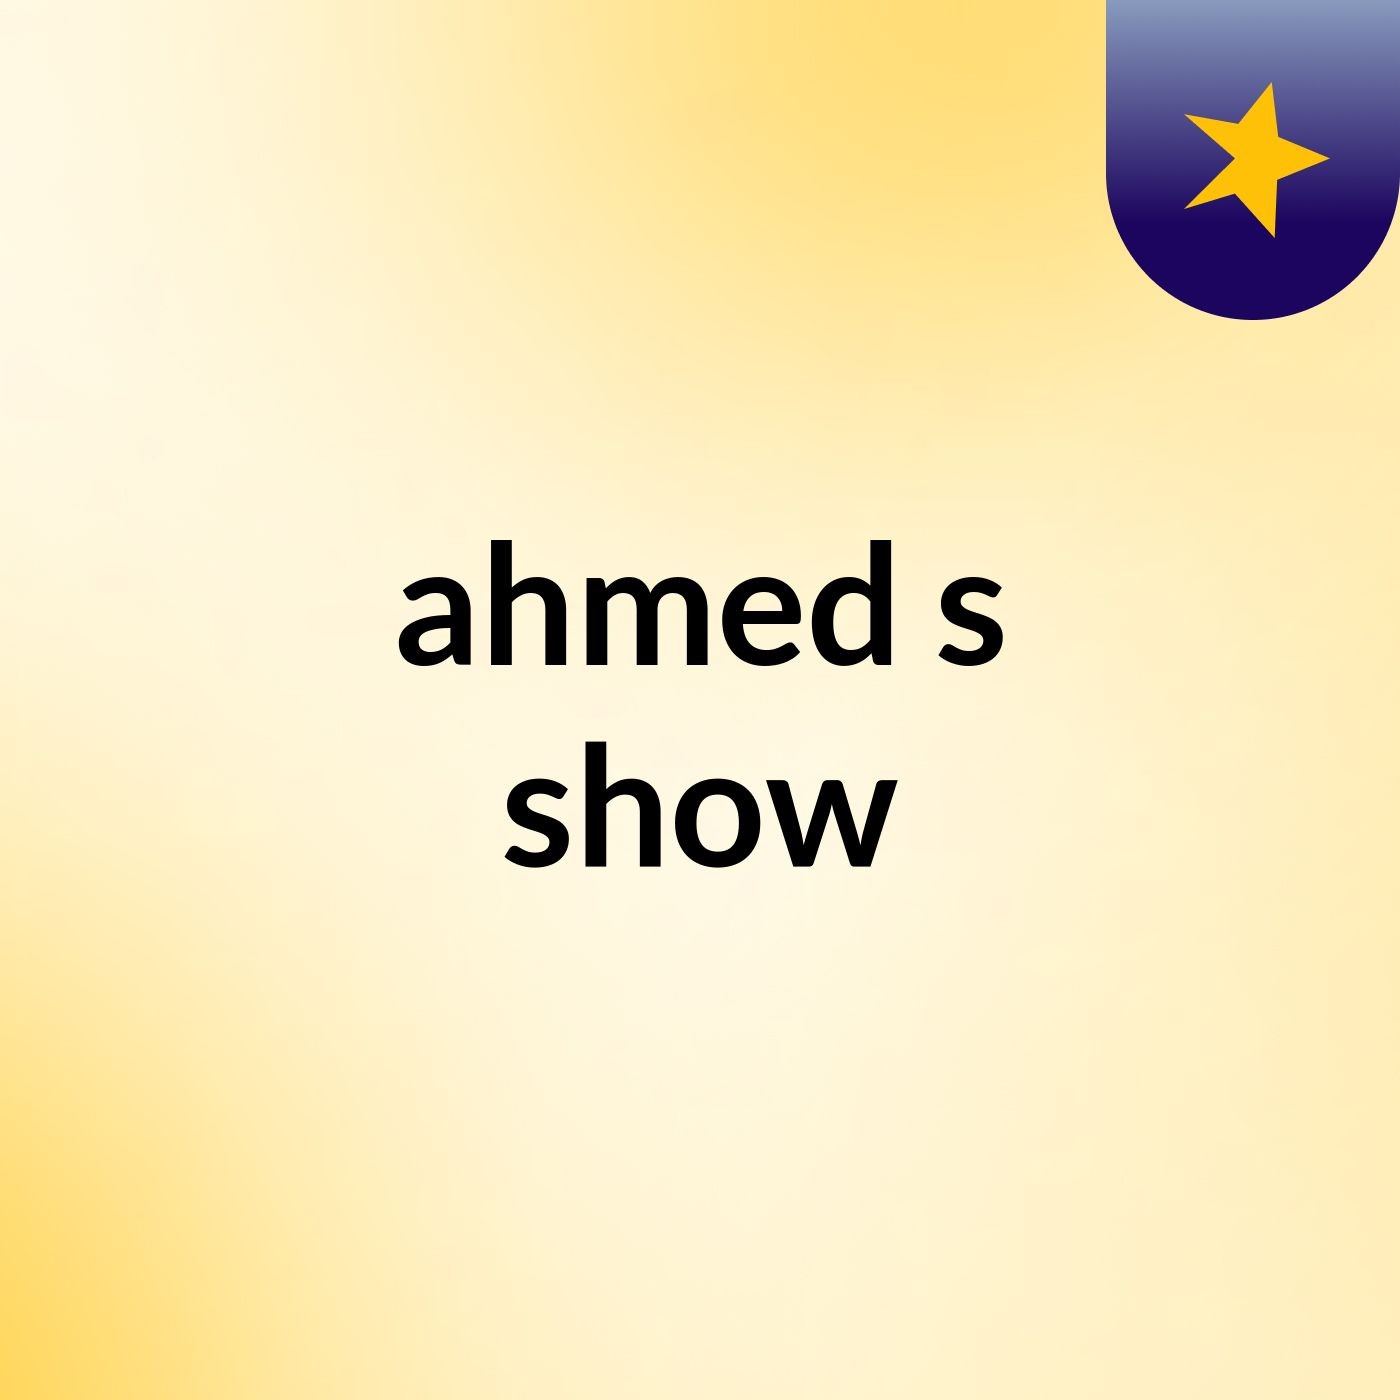 ahmed's show